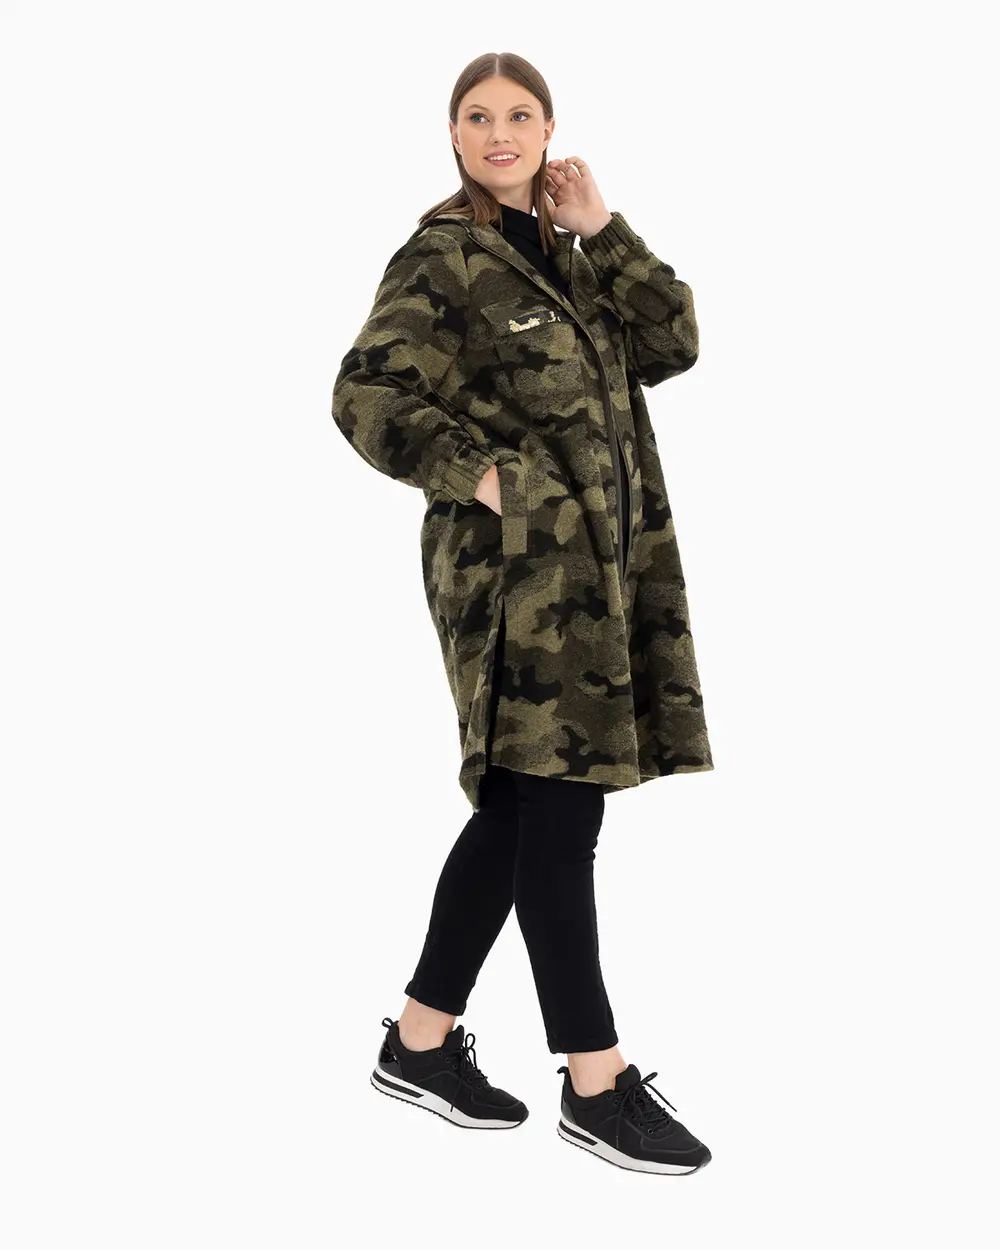 Plus Size Camouflage Patterned Cap